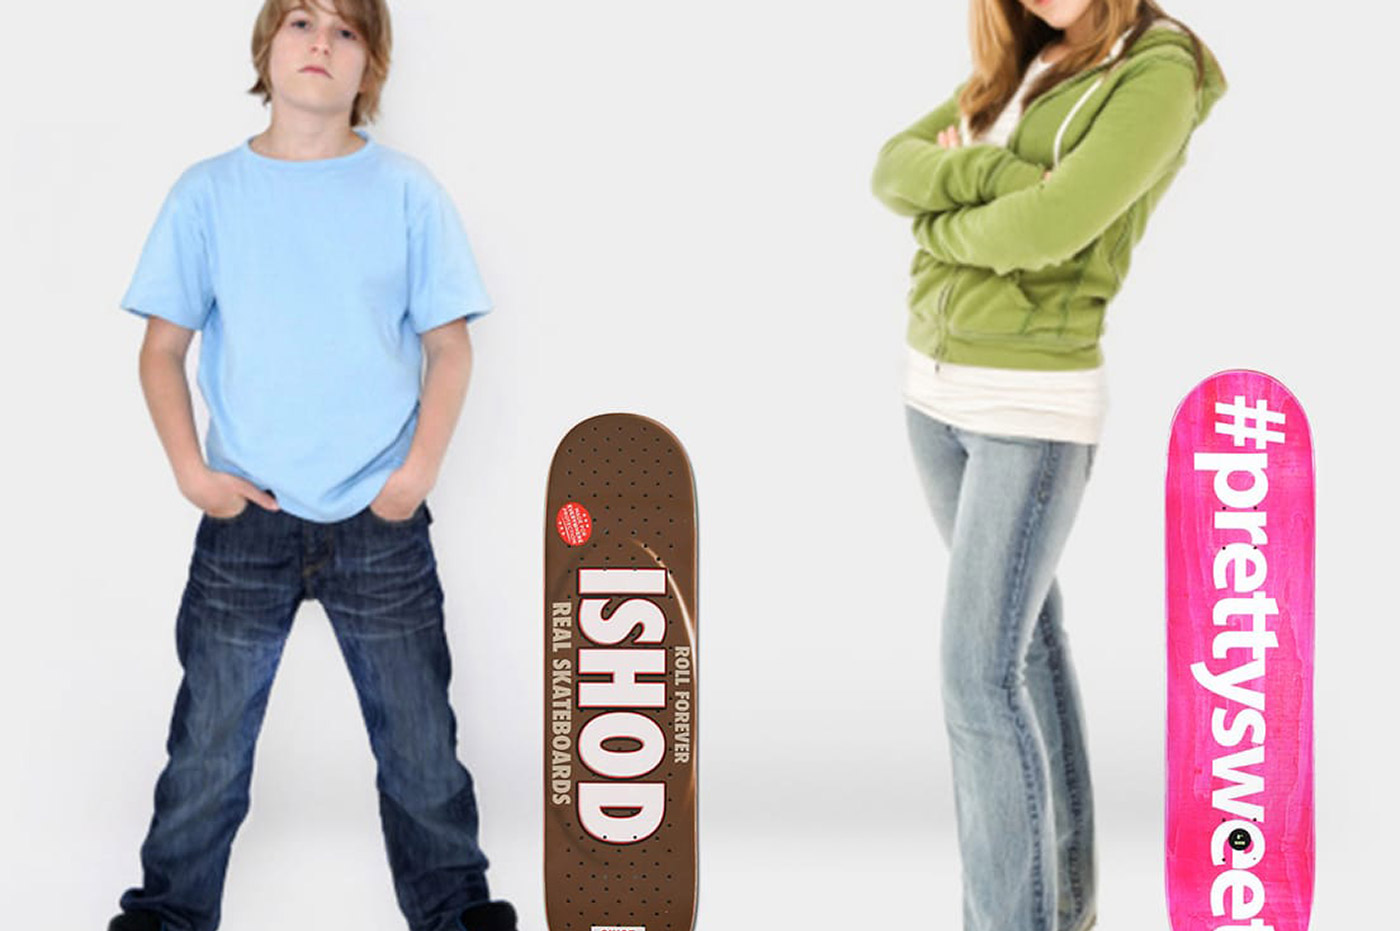 Two children standing next to their skateboards.